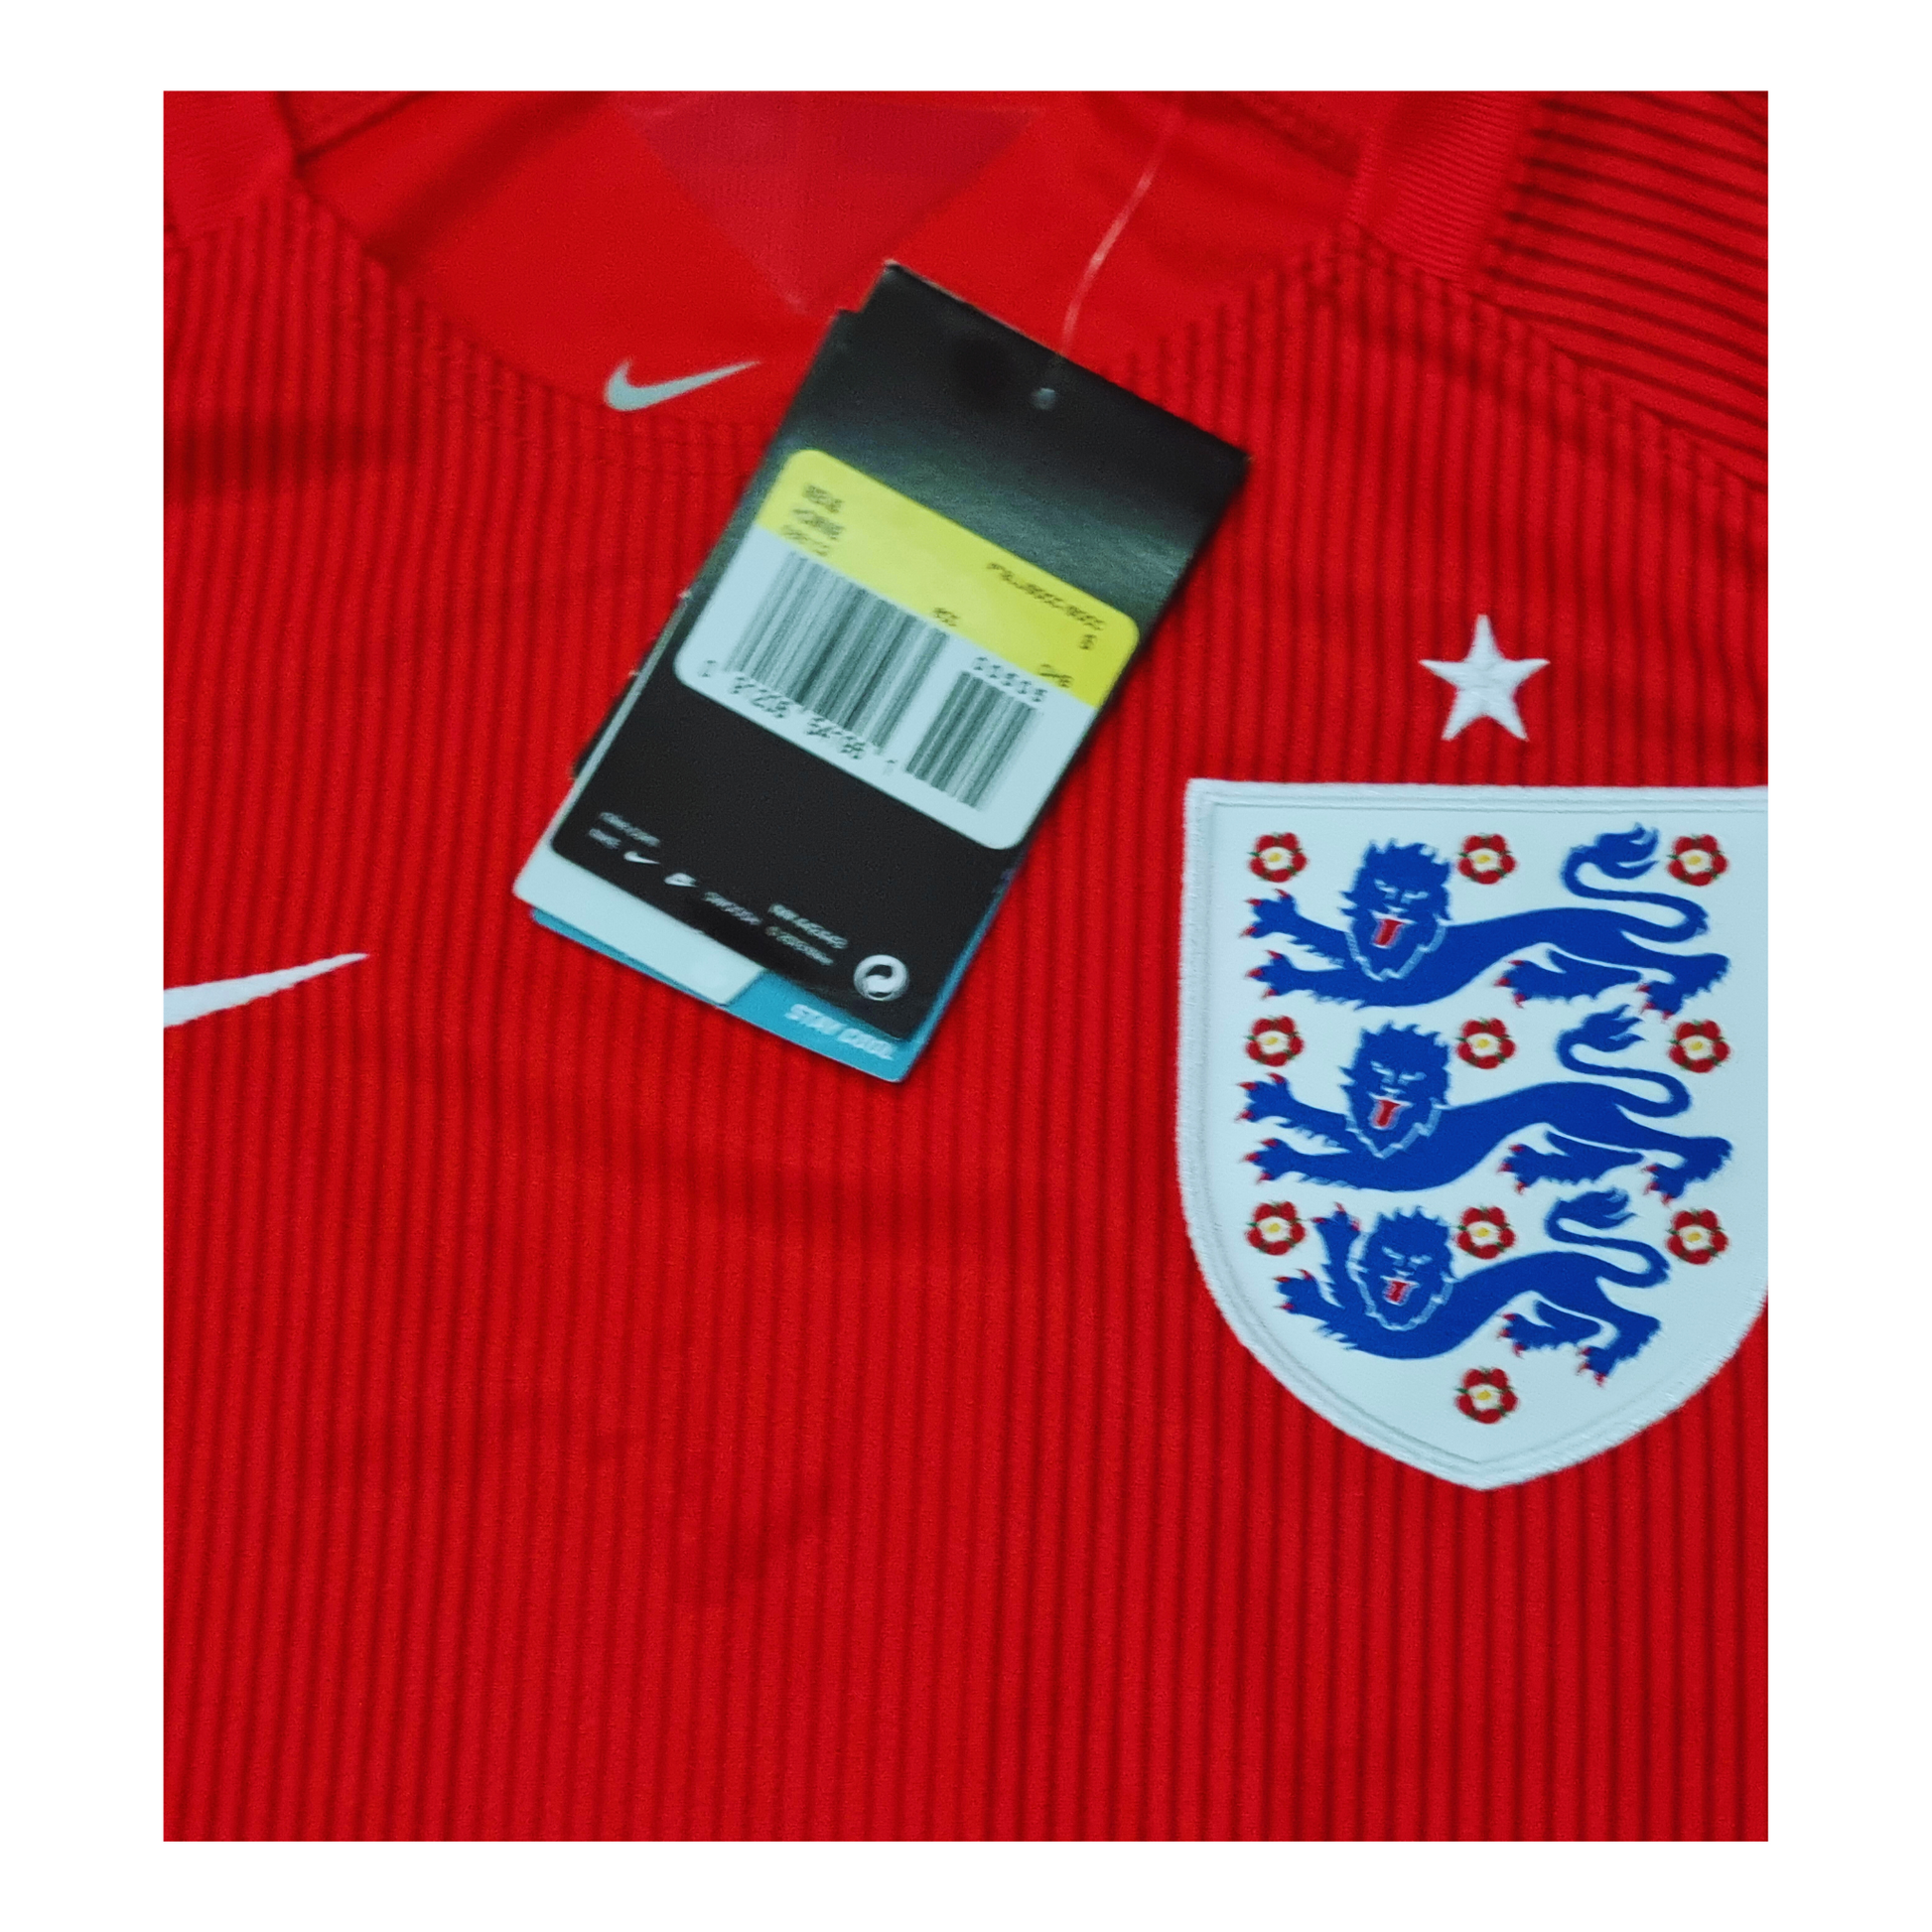 Nike's England 2014 Away Jersey with a tag on it, available in Small and Medium sizes.